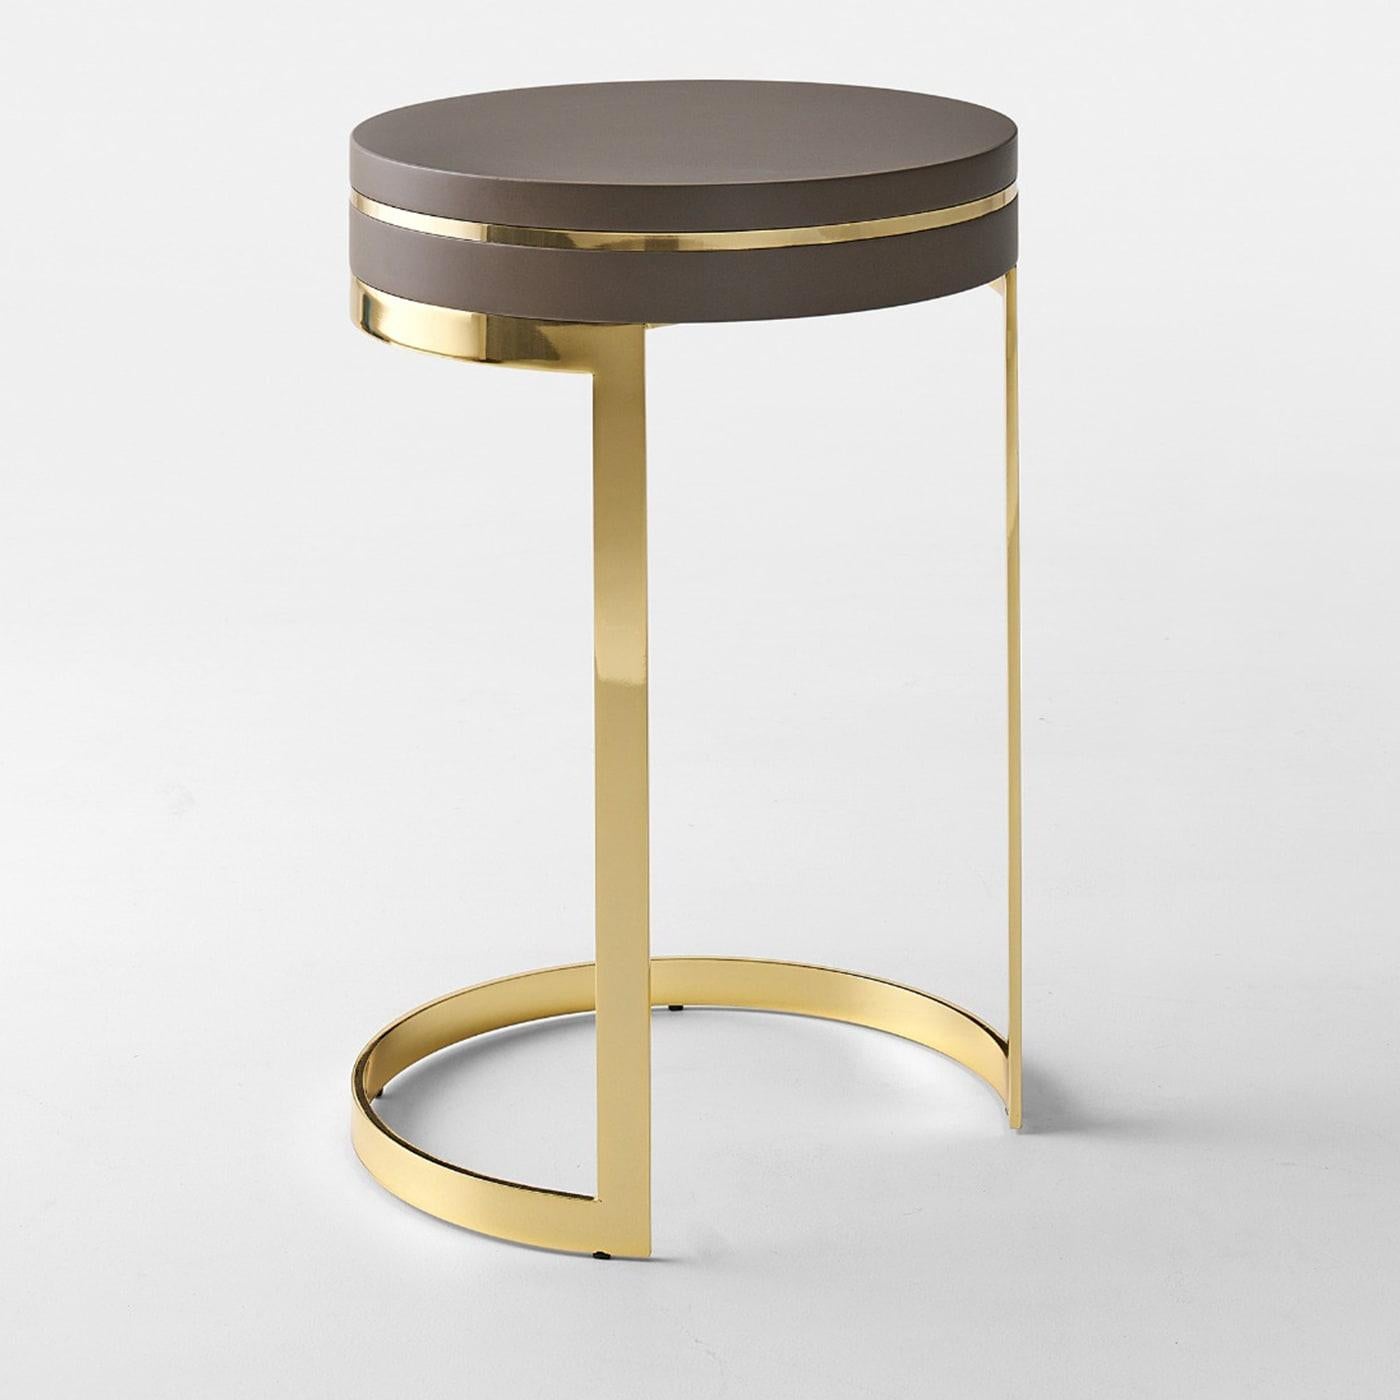 Distinctly modern in its asymmetrical design and rich in geometric lines, this round side table makes for a refined addition to modern interiors. A precious glossy golden finish marks the sleek structure, which comes complete with wooden inserts